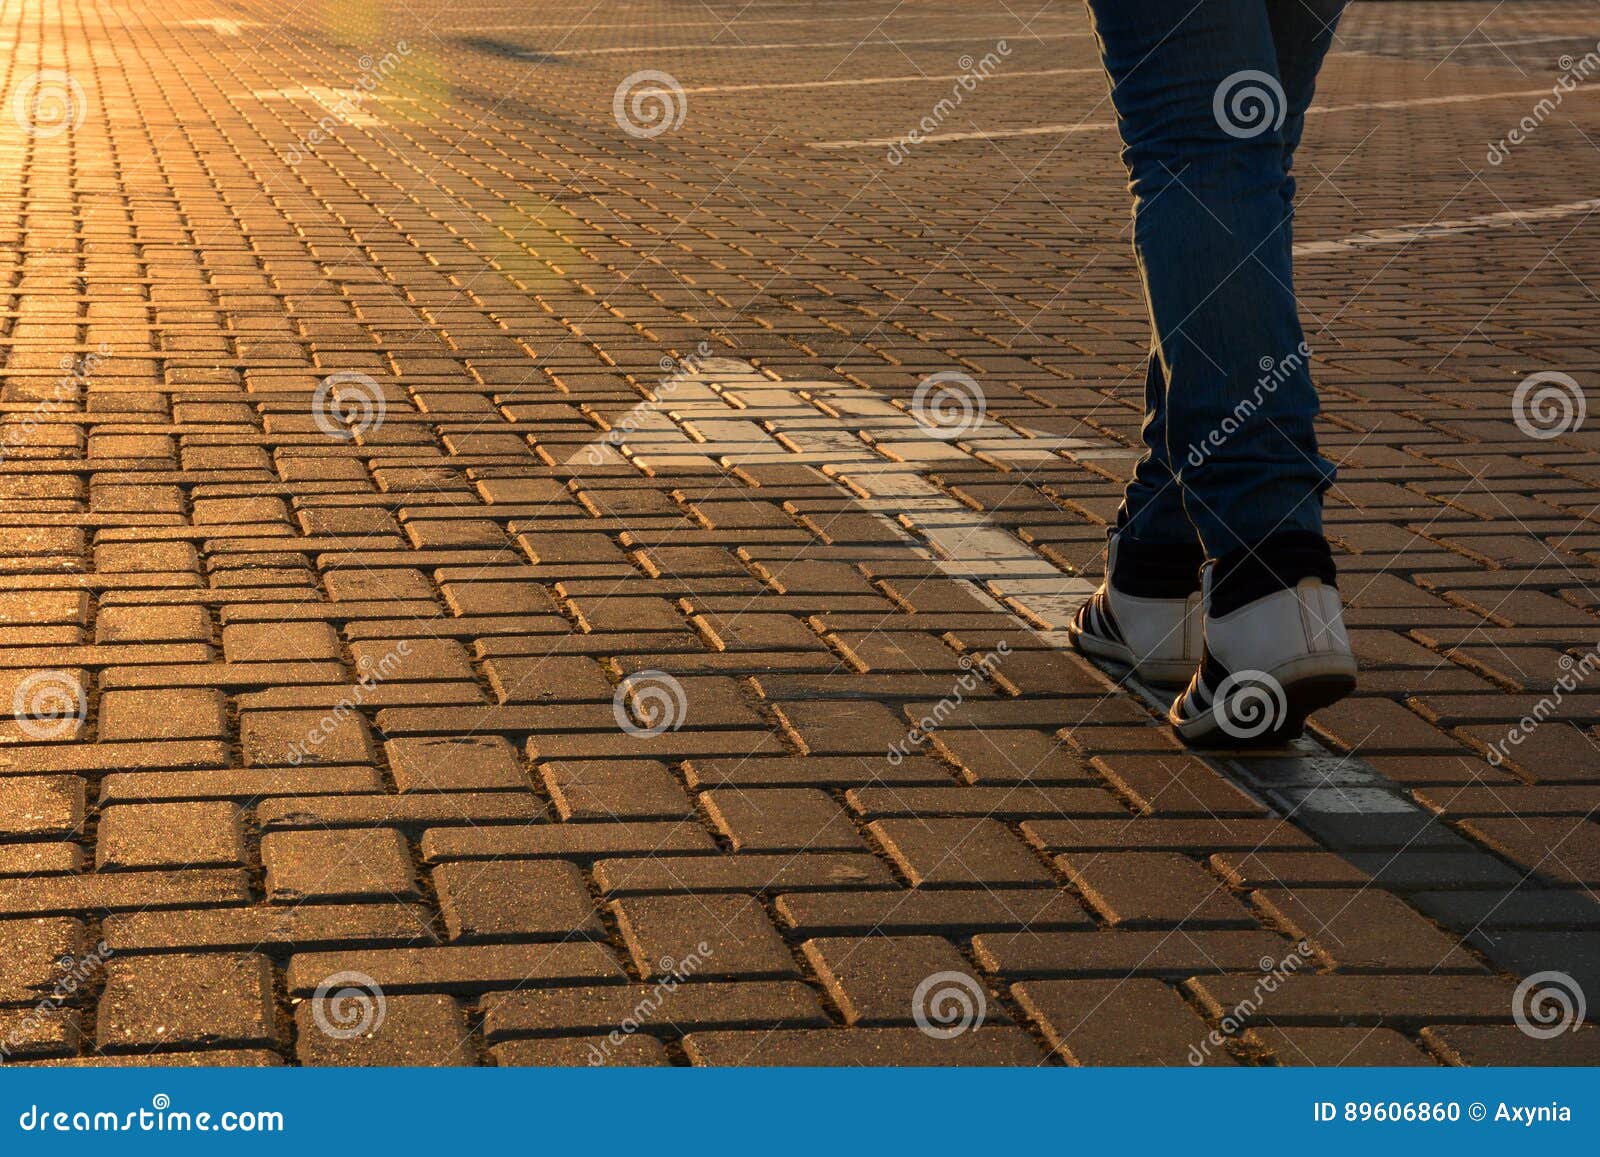 forward movement. feet on the road with arrows in the rays of the setting sun